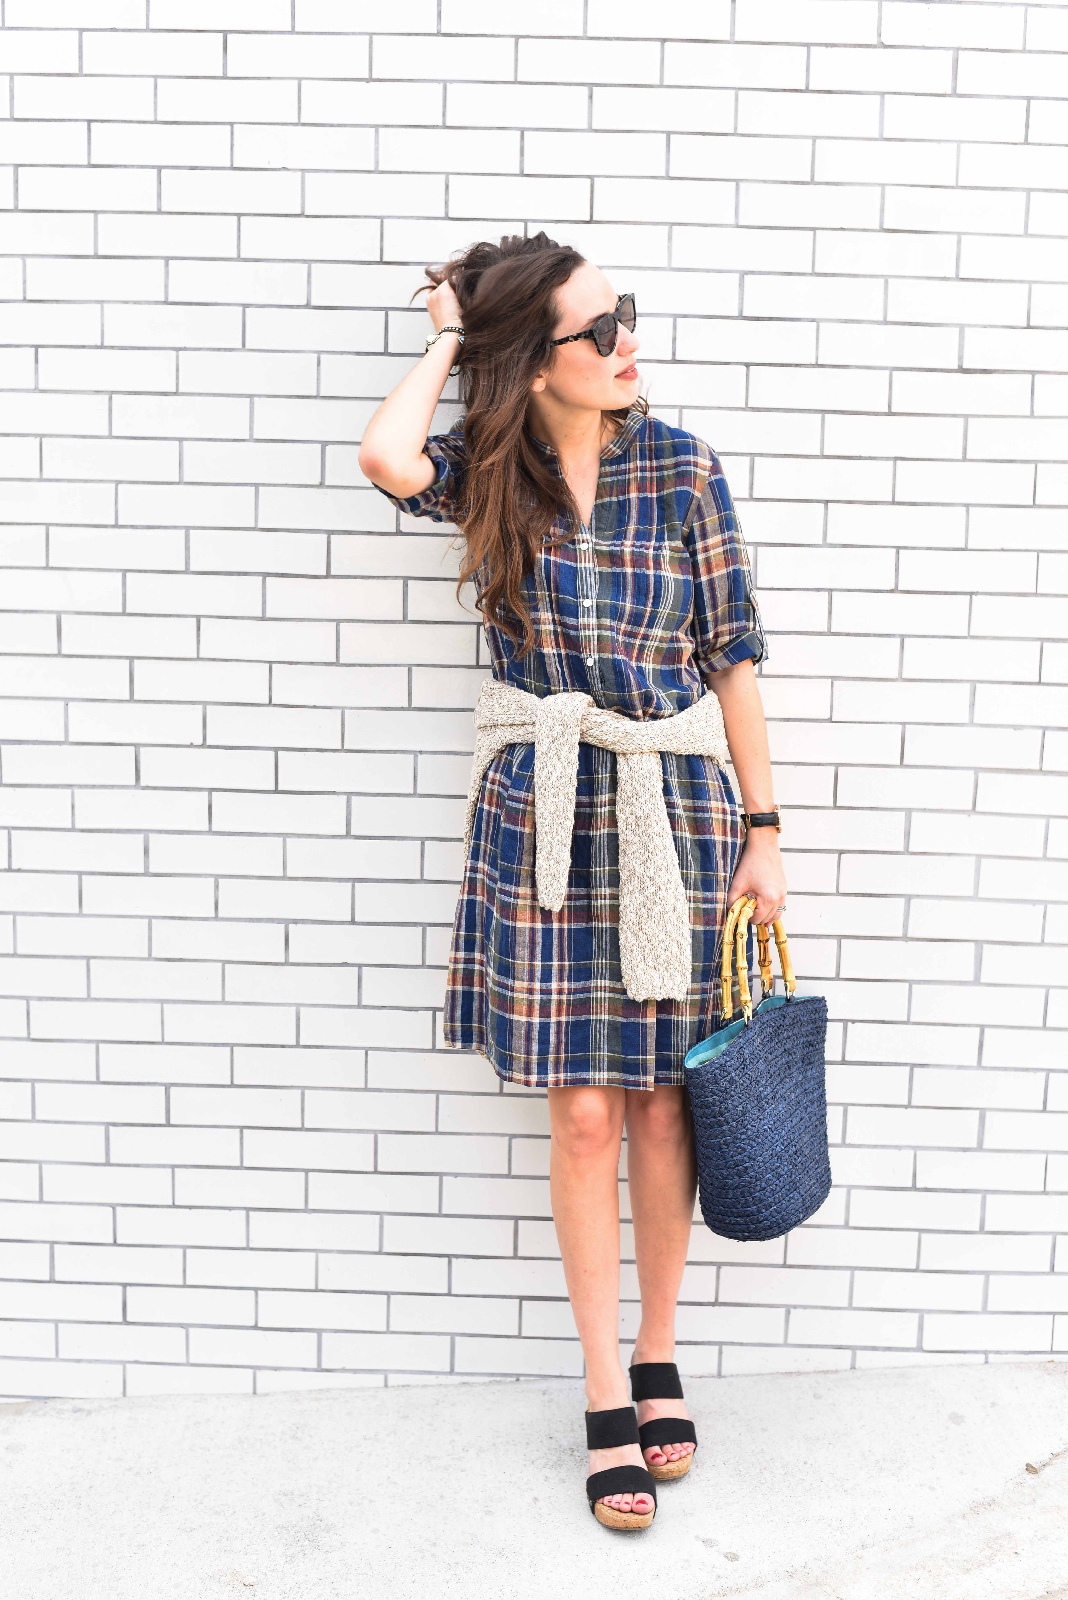 jmclaughlin plaid dress, fall transitional outfits, what to wear between summer and fall, navy bamboo tote bag, jmclaughlin fall 2016